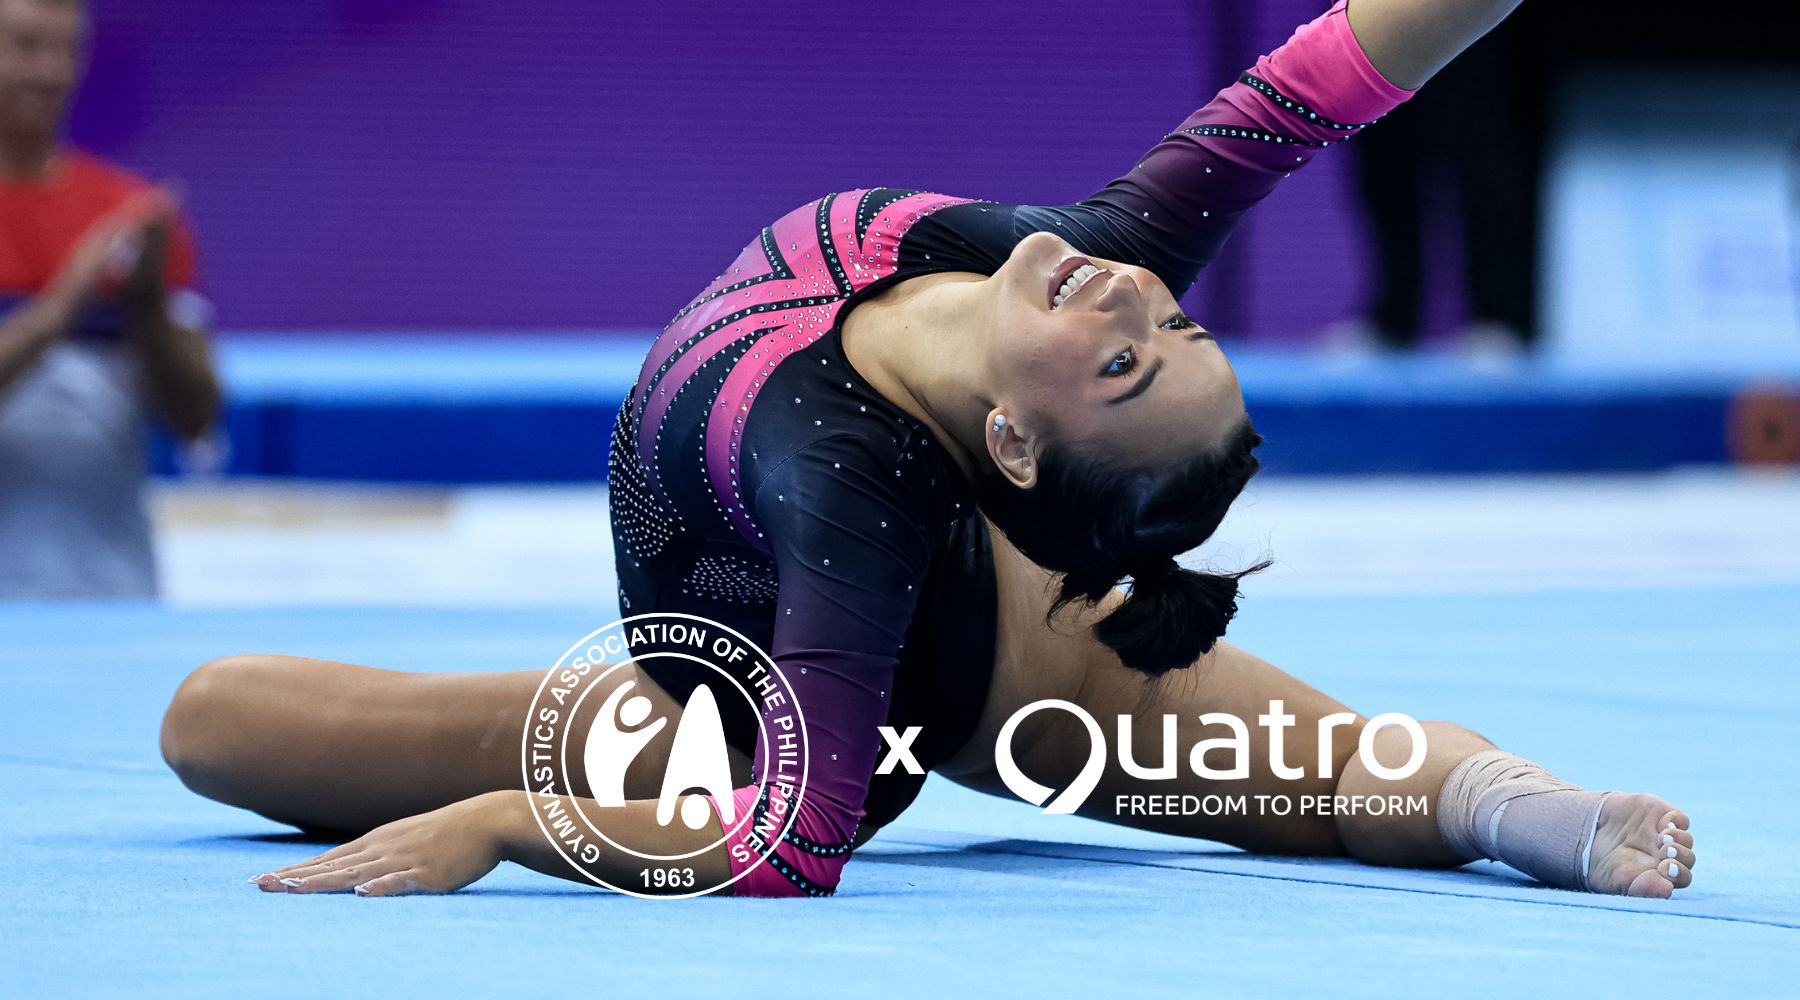 Quatro Is Proud To Announce Partnership with the Gymnastics Association of the Philippines